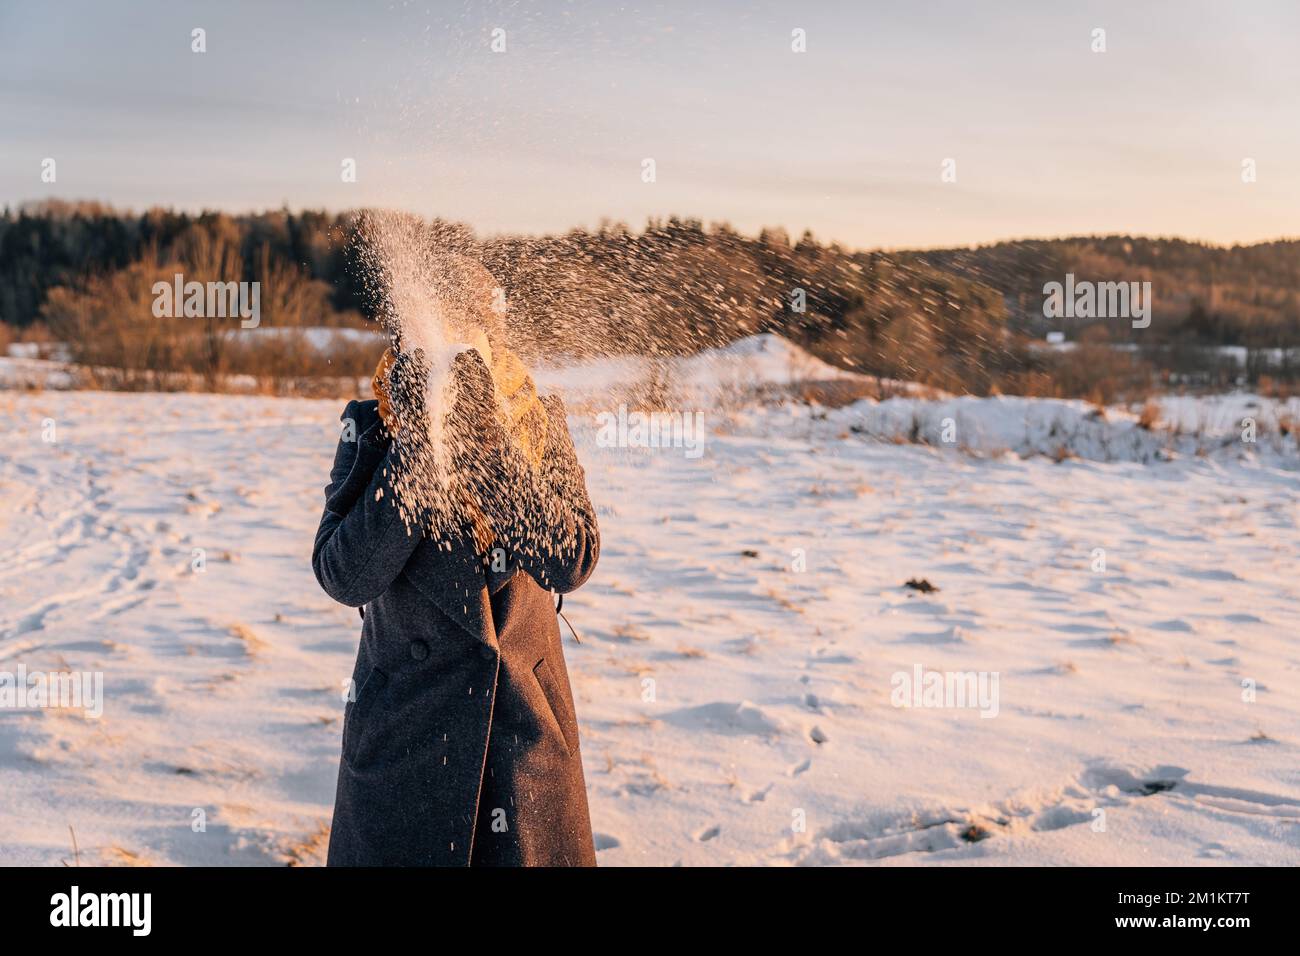 A woman with a obscured face throws snow with her hands in a snow-covered field Stock Photo